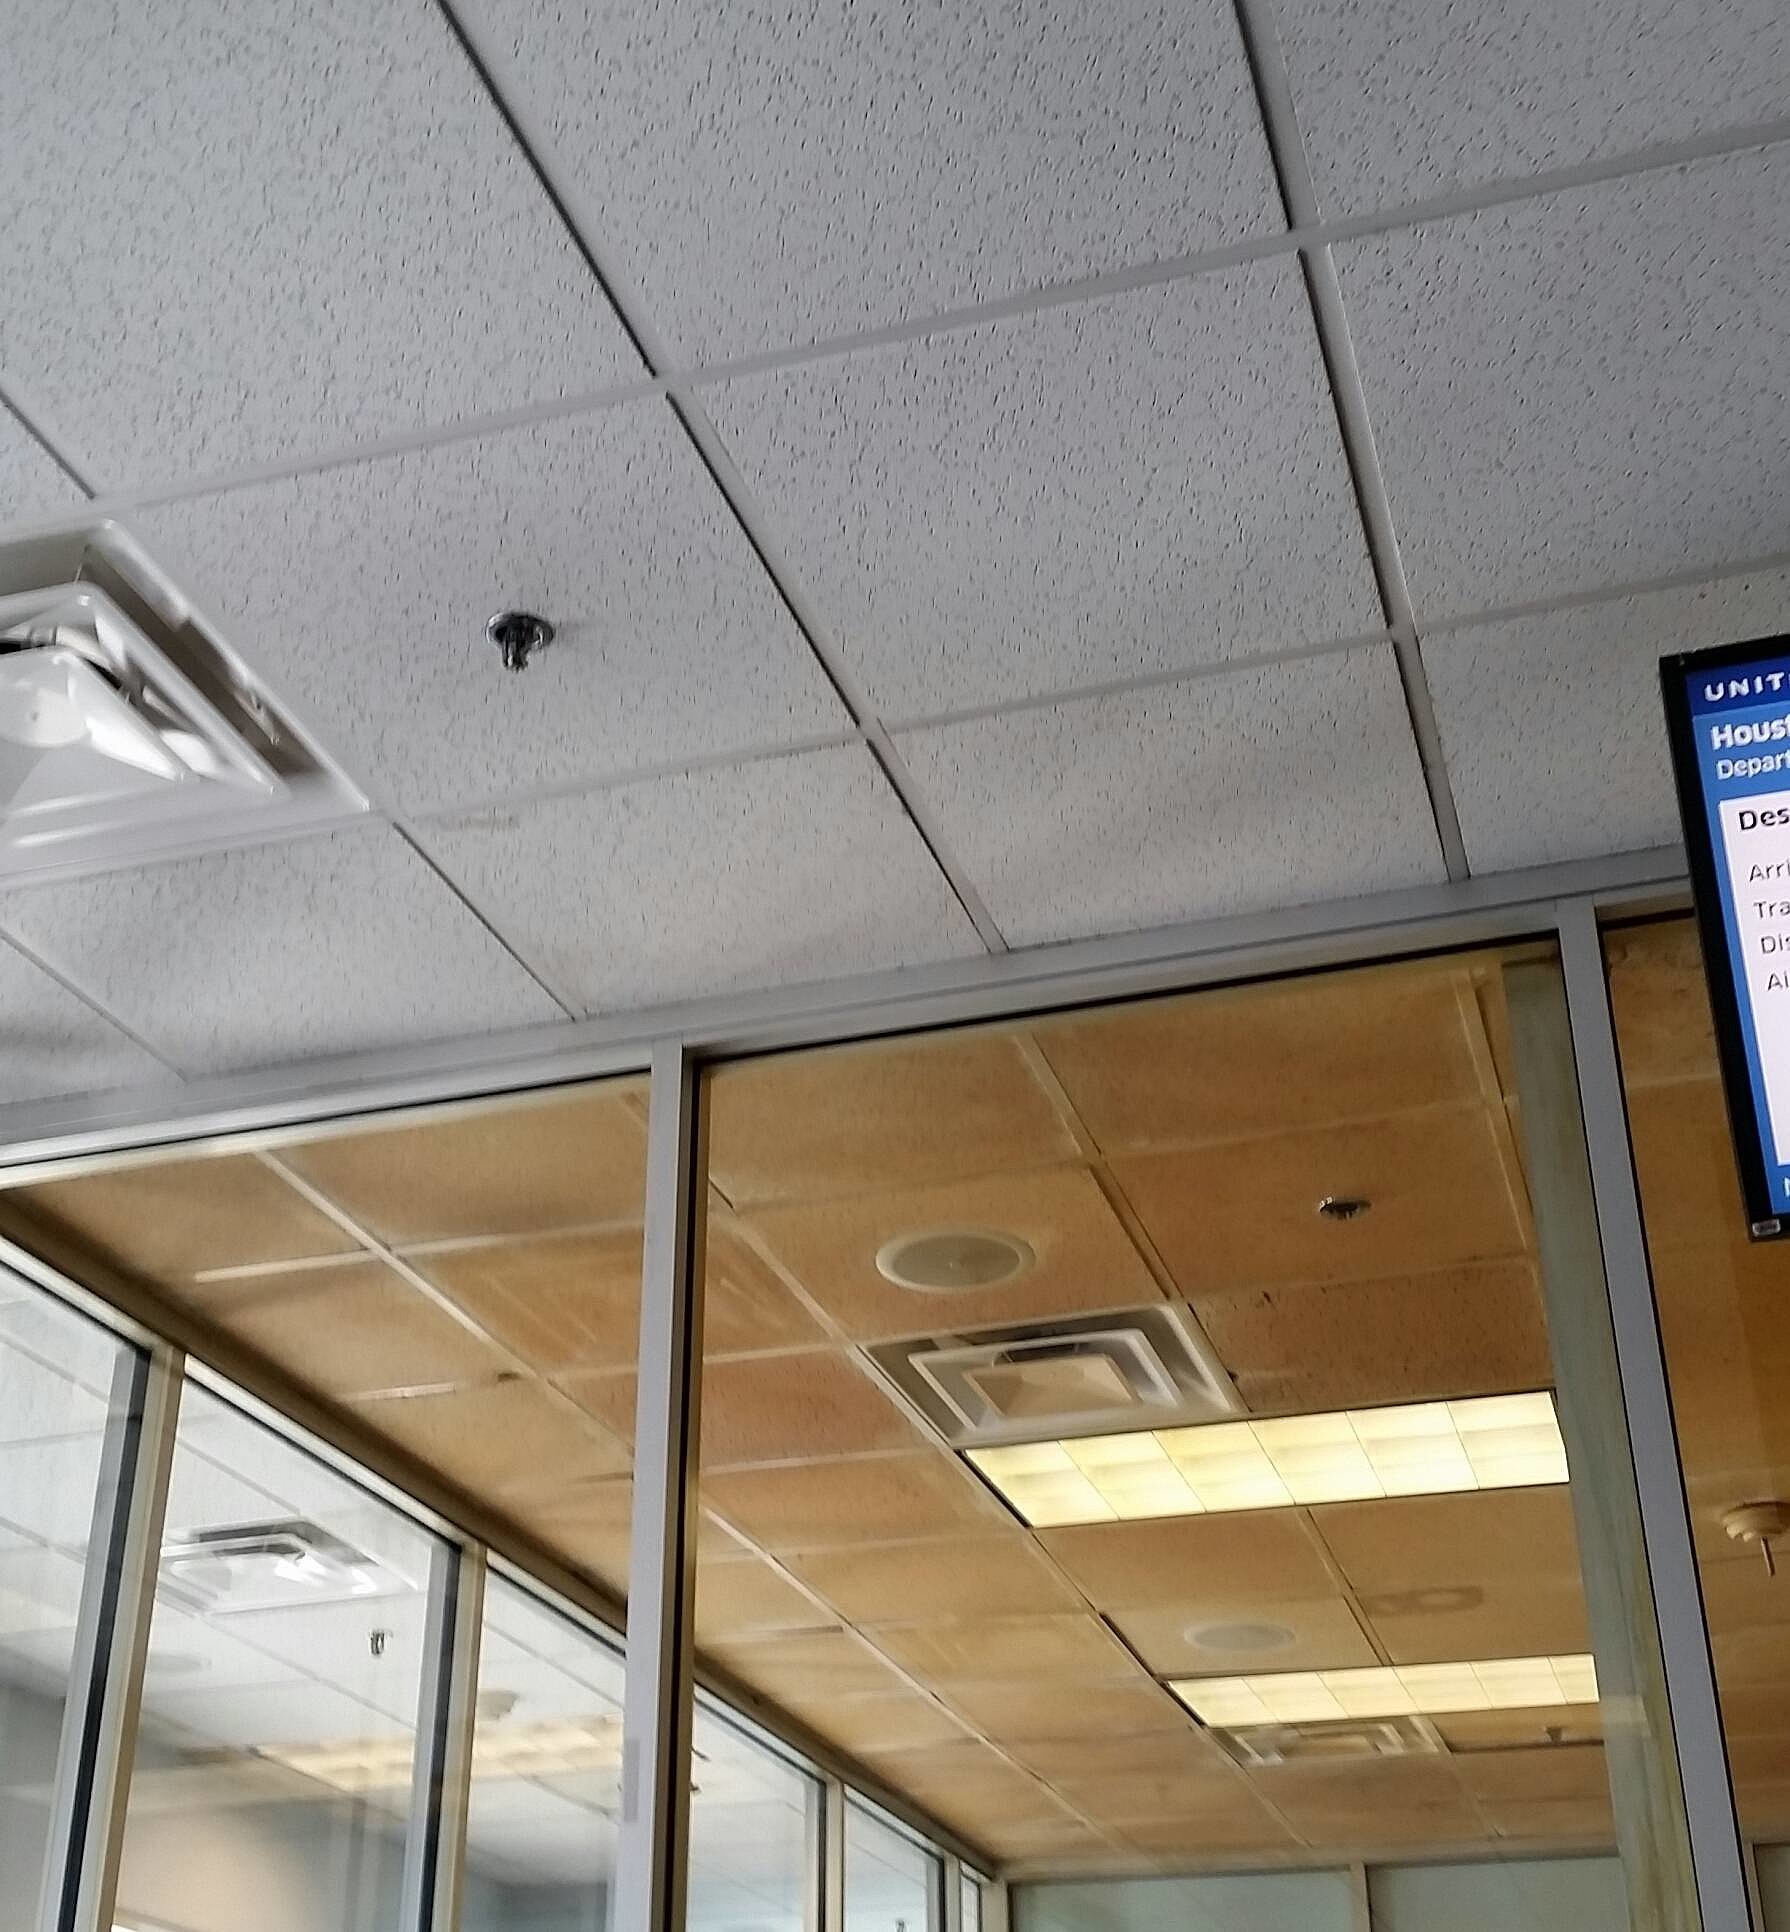 Ceiling of the smoking room at Washington-Dulles airport